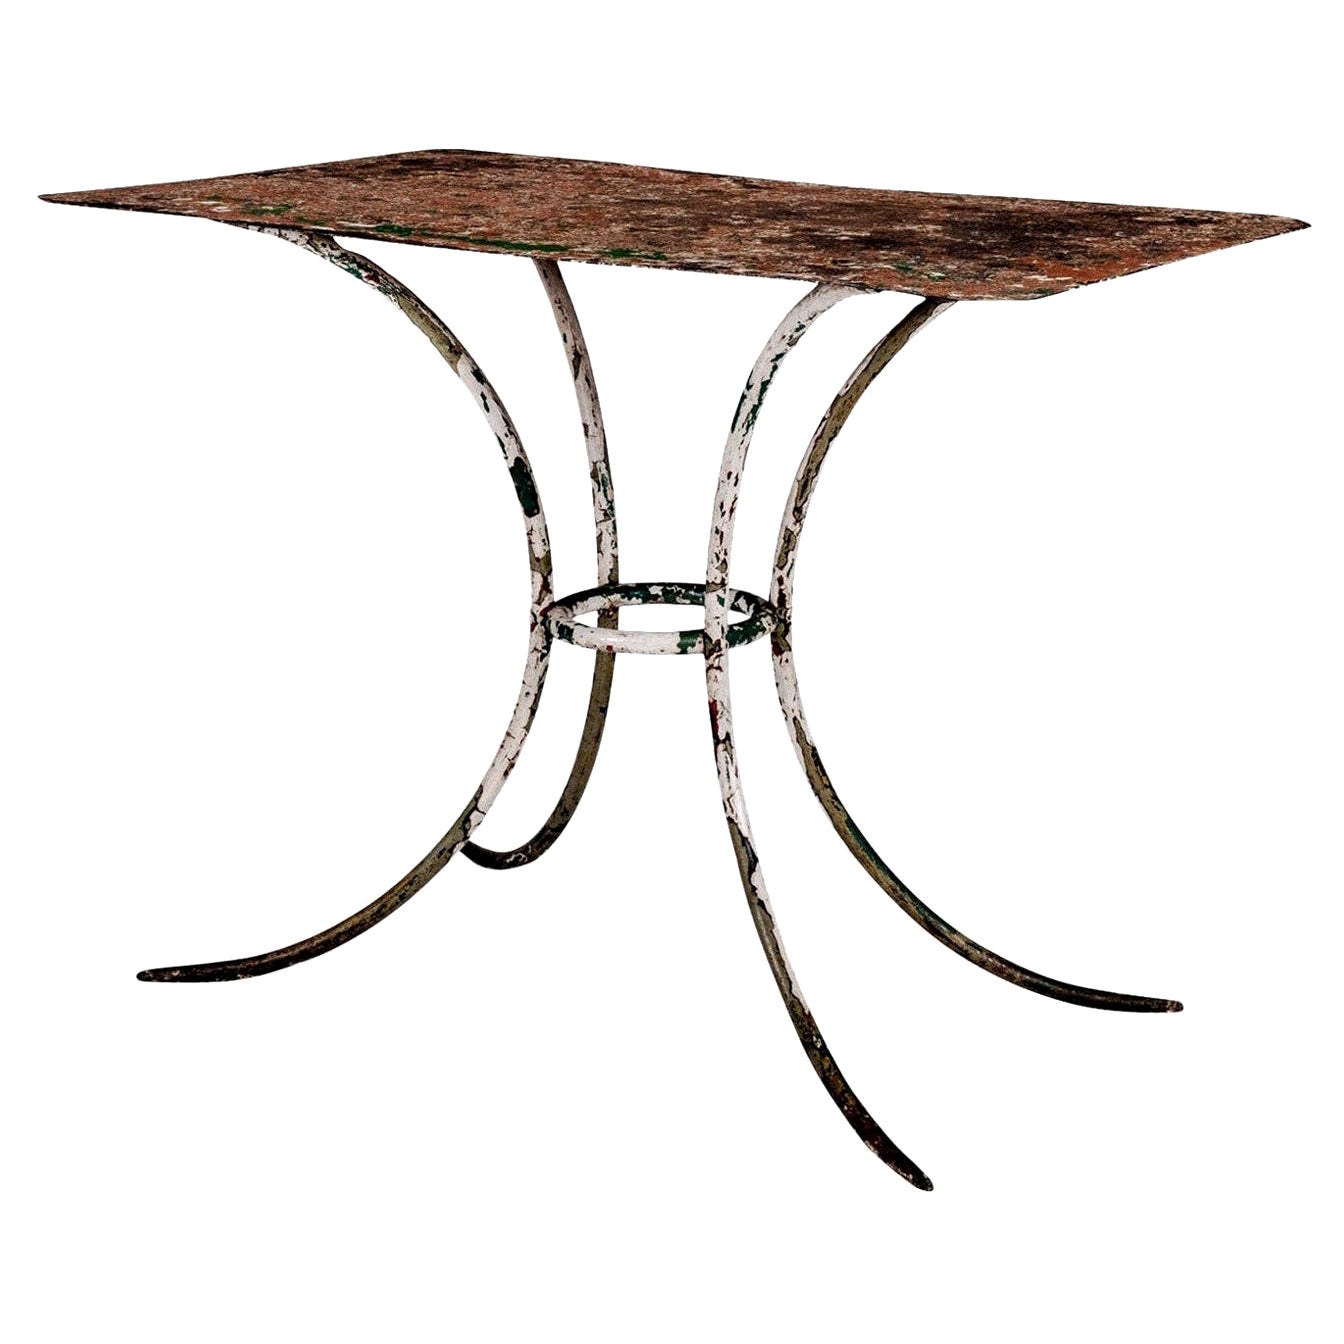 Painted Iron Garden Table from France